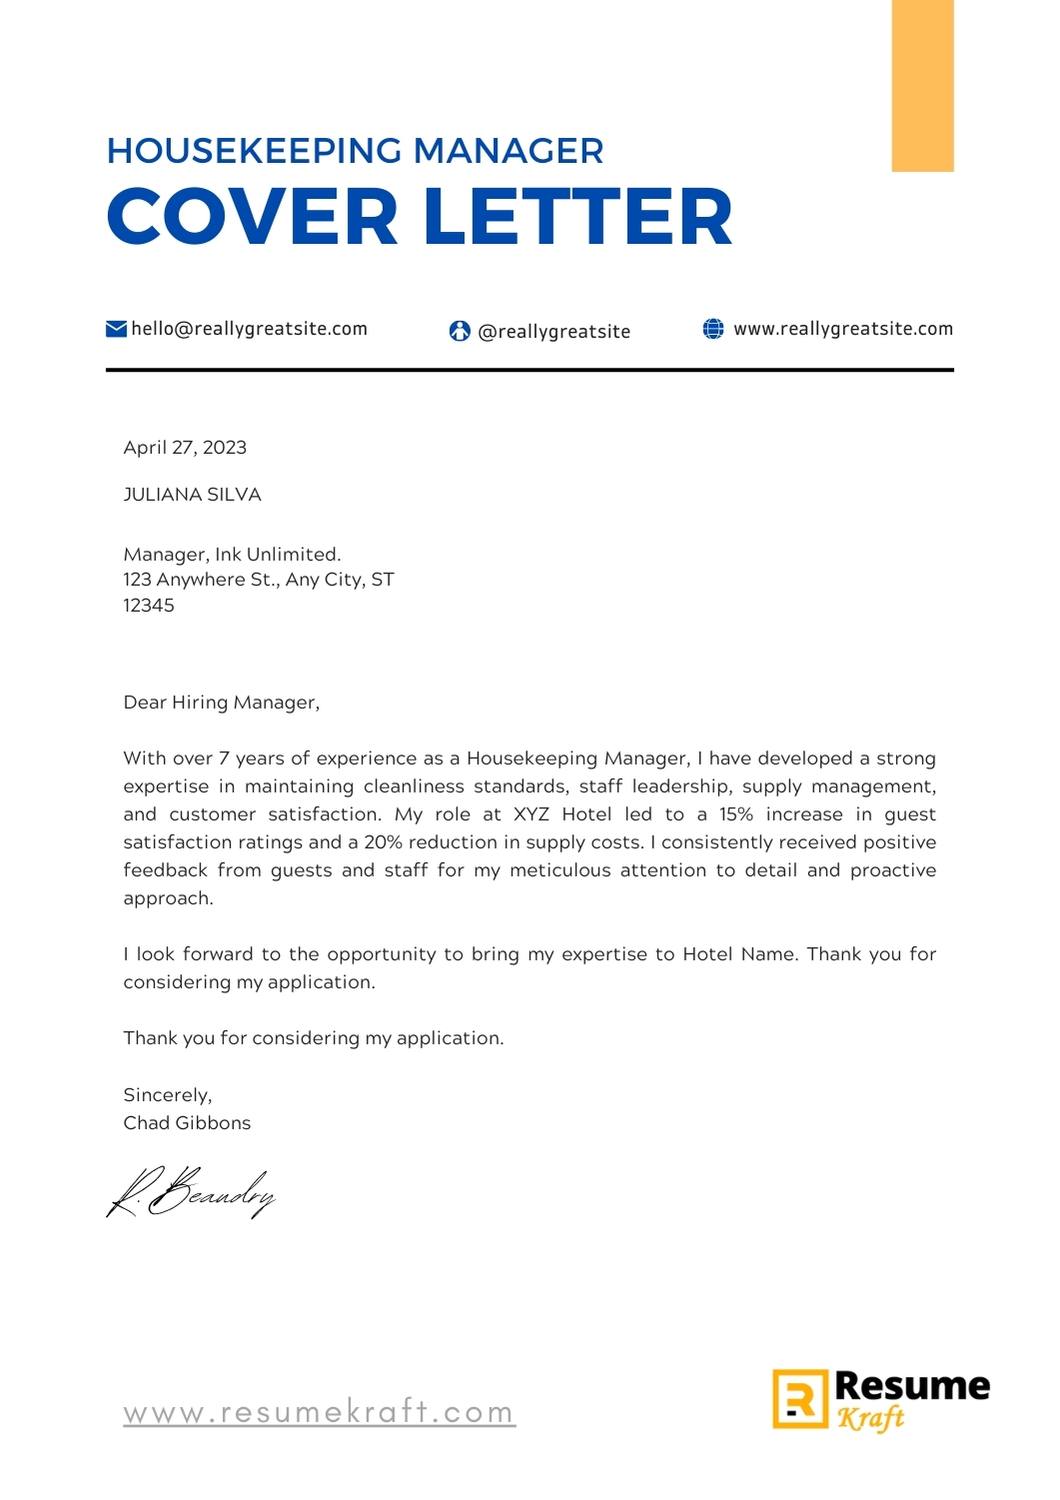 housekeeping sample cover letter